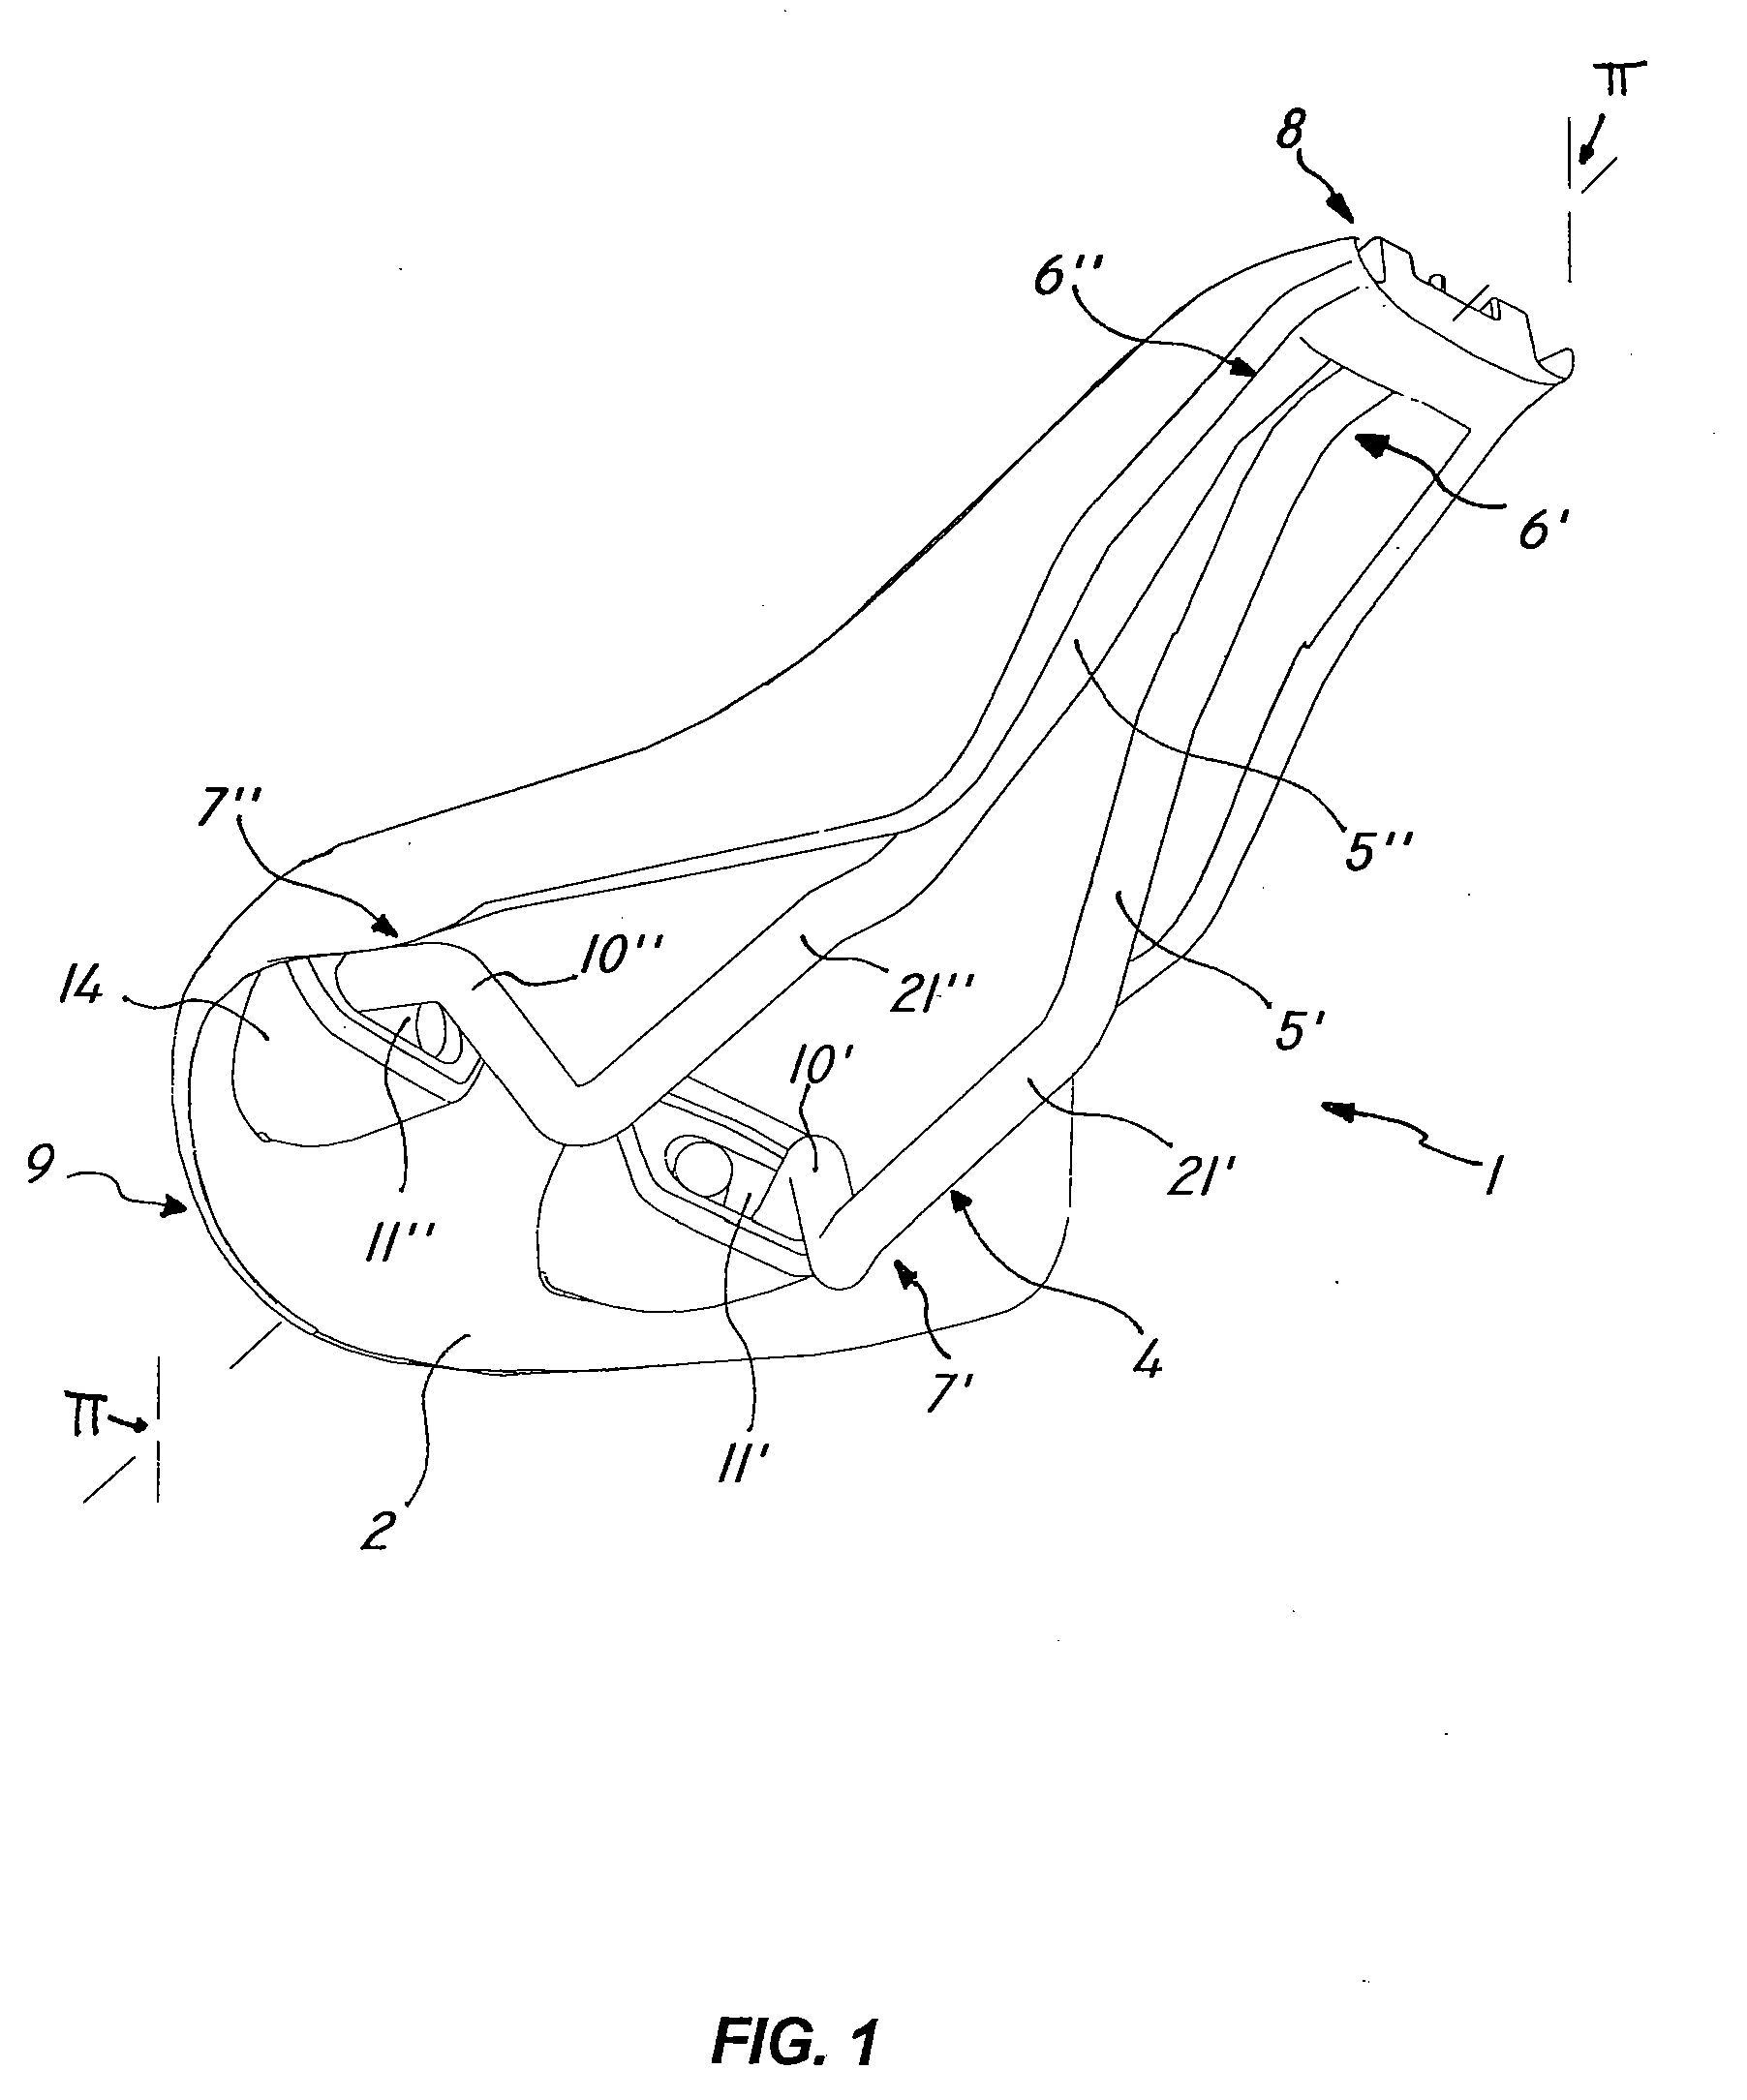 Mounting Assembly For Stable Attachment of a Seat, Particularly a Bicycle Saddle